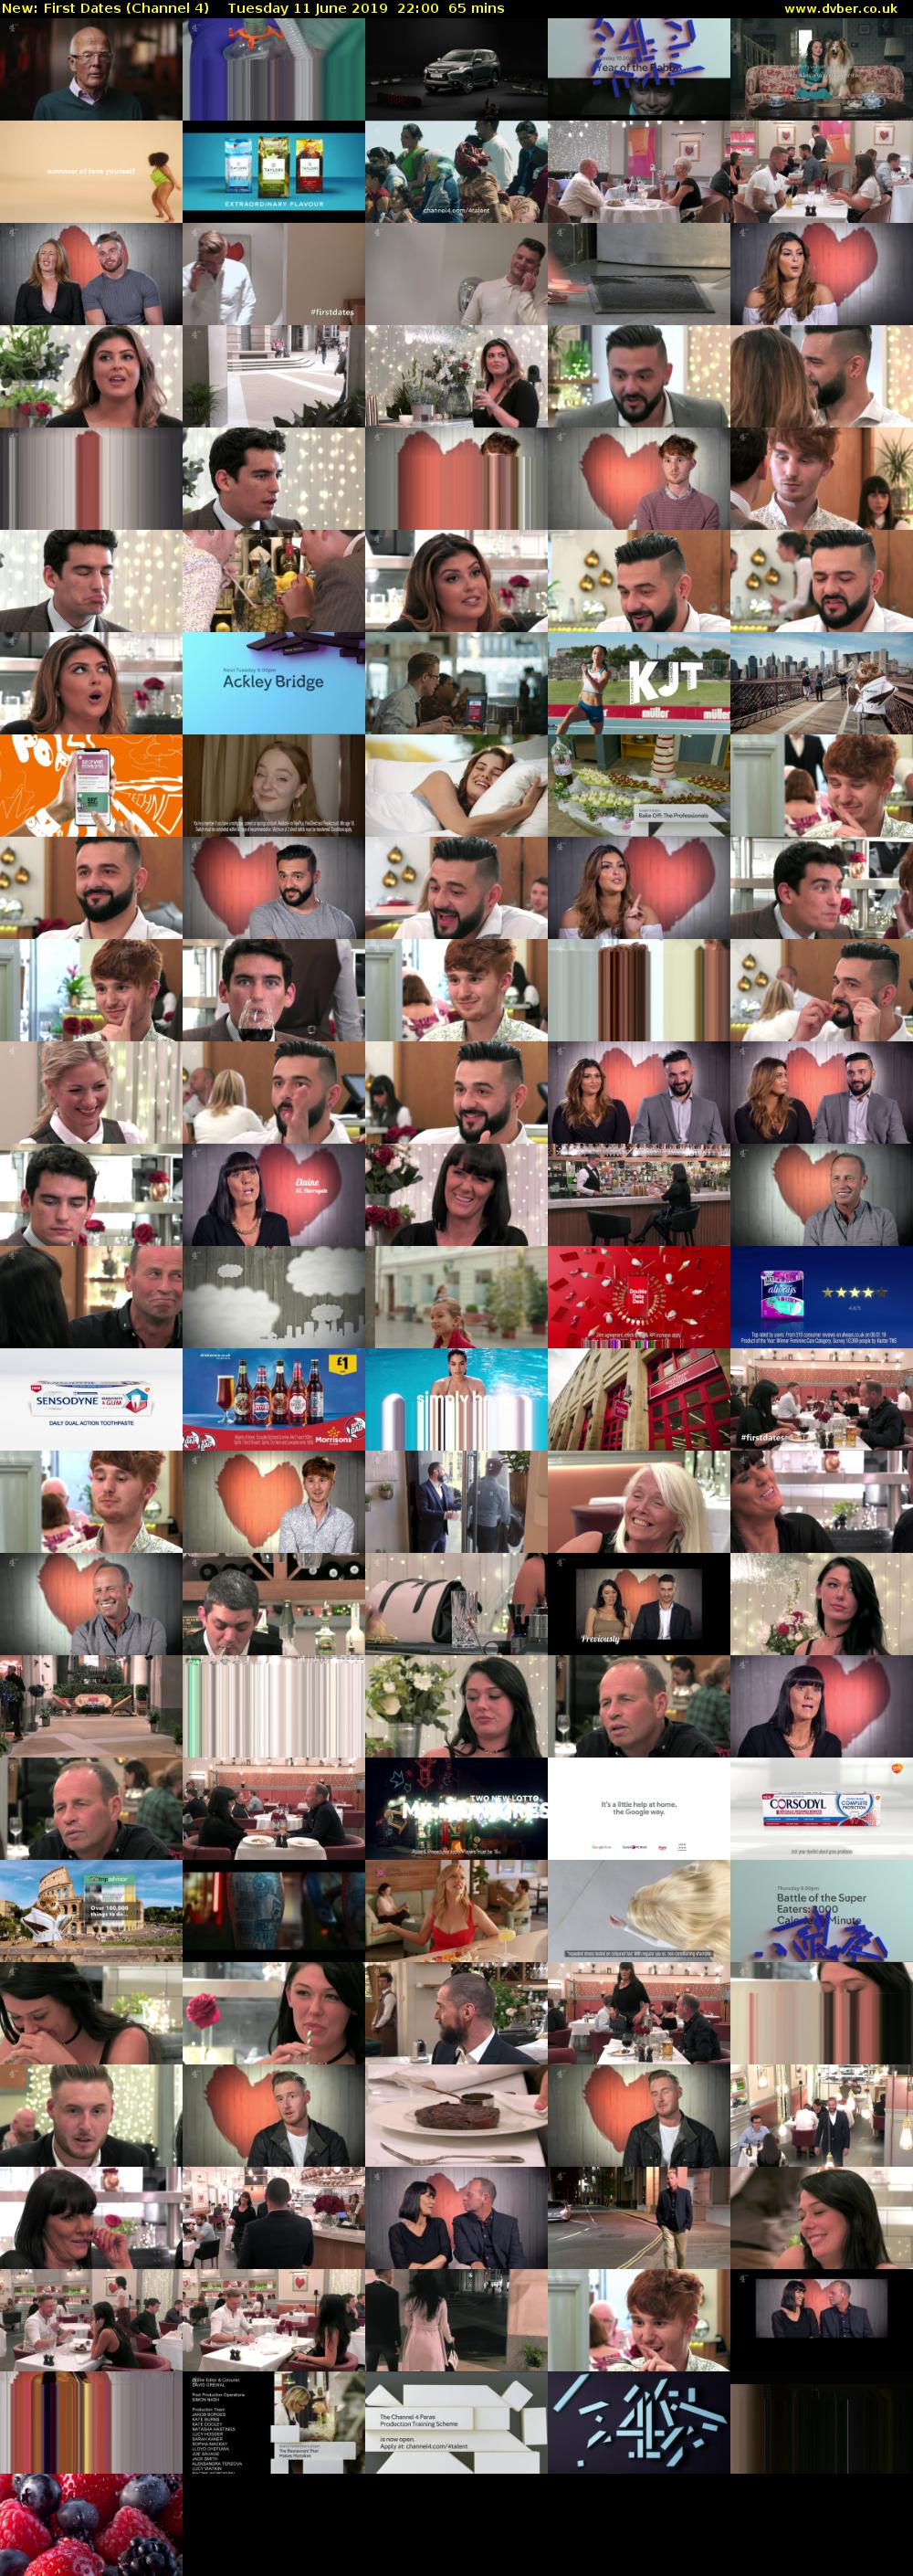 First Dates (Channel 4) Tuesday 11 June 2019 22:00 - 23:05